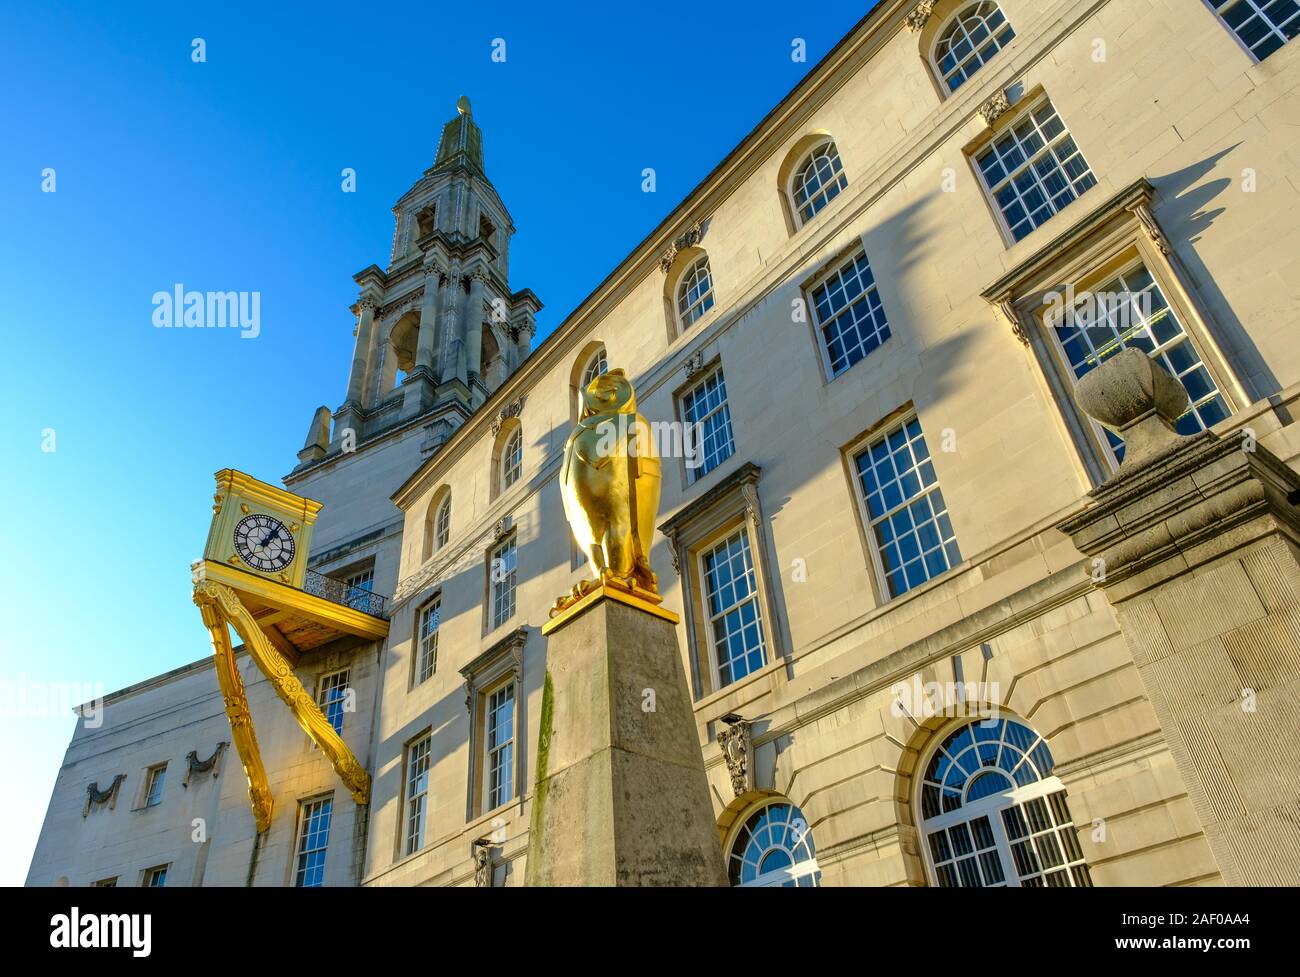 Golden Clock and Owl on the Civic Hall in Leeds, West Yorkshire, UK Stock Photo